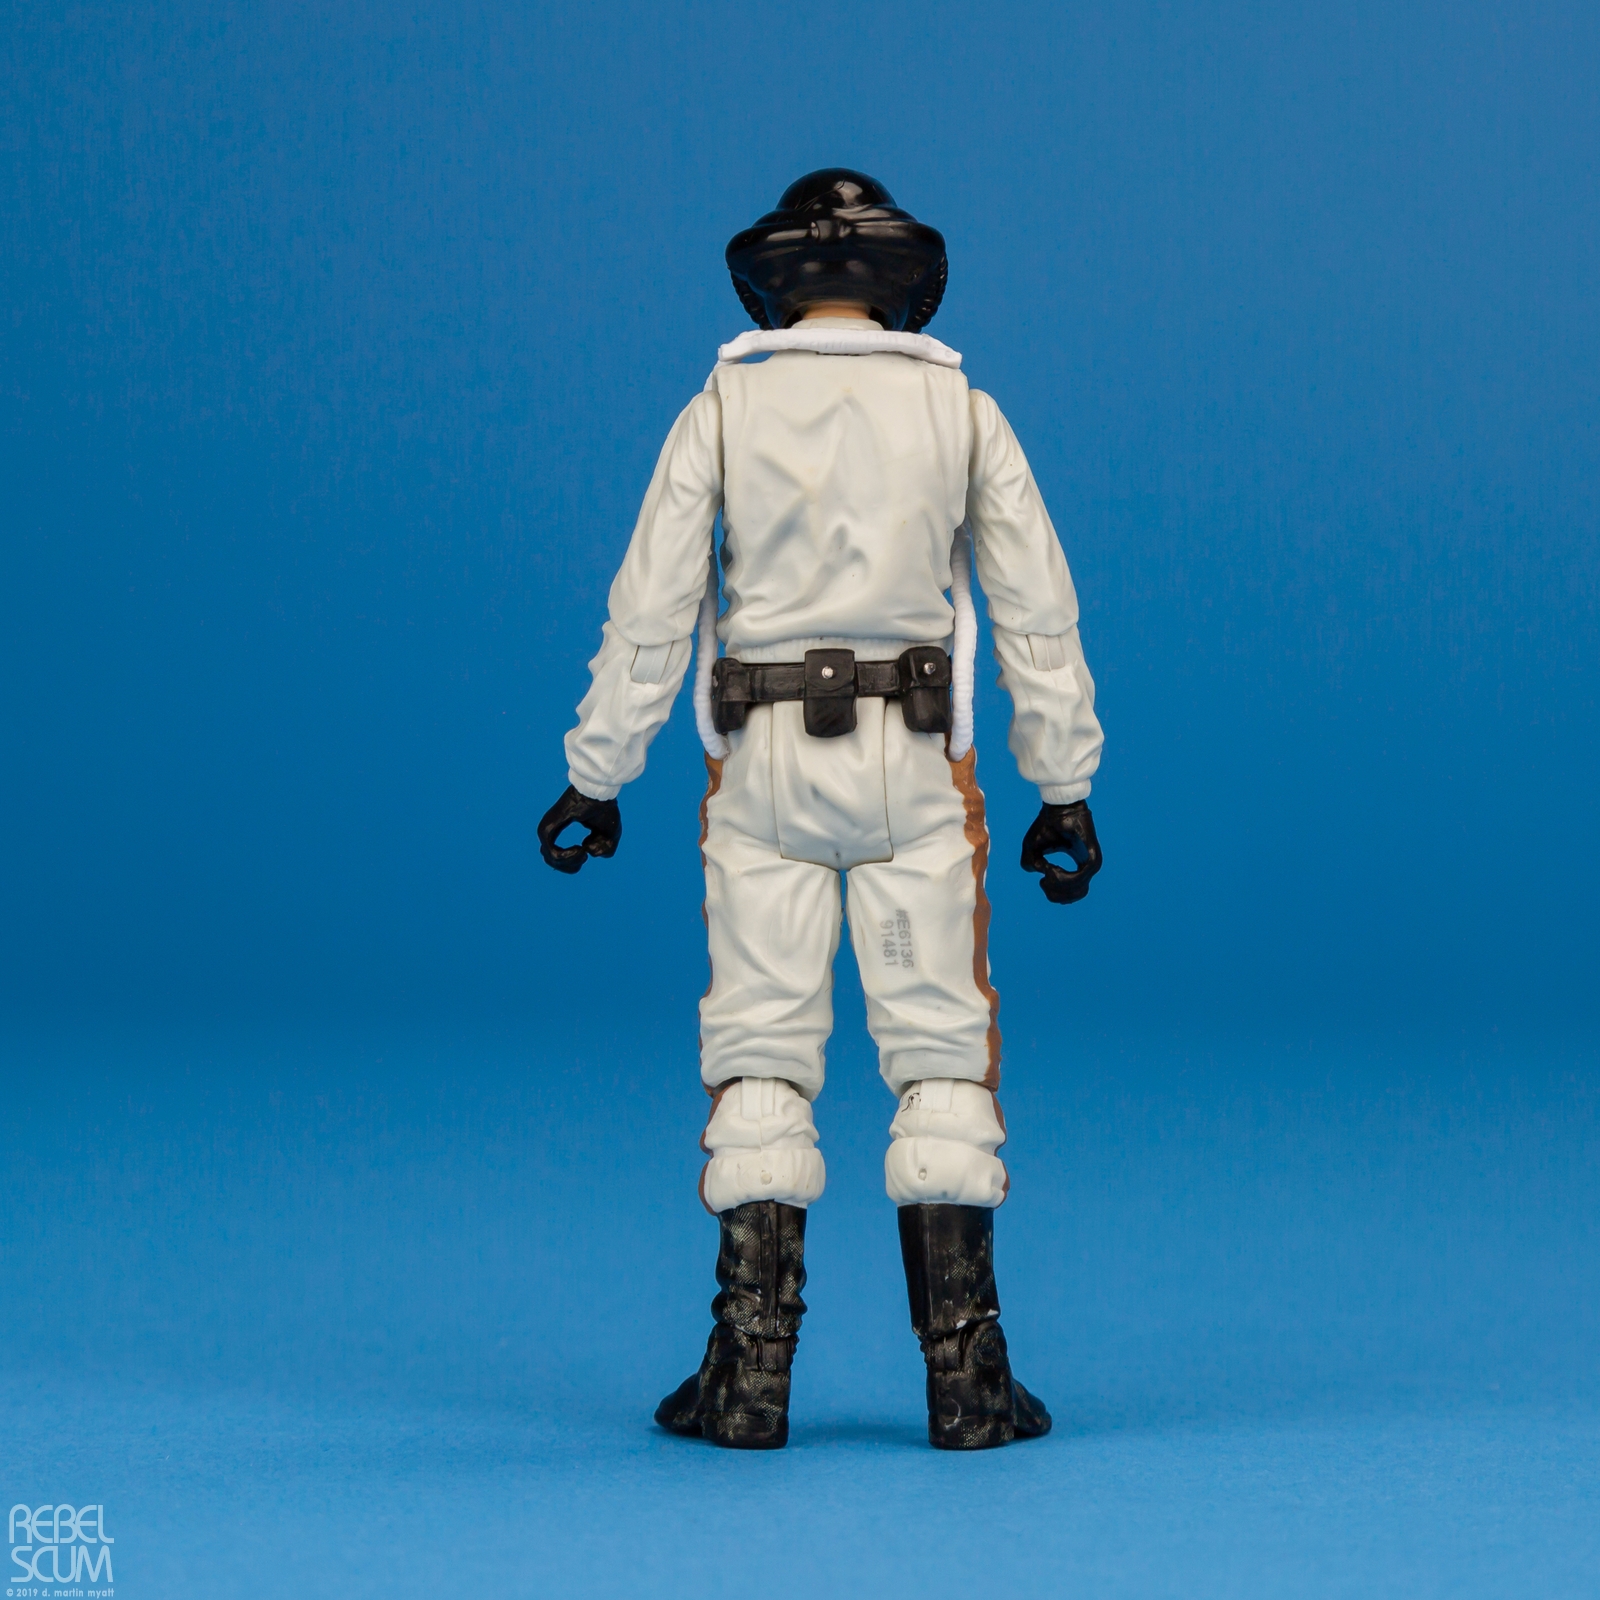 Special-3-Action-Figures-Set-The-Vintage-Collection-026.jpg